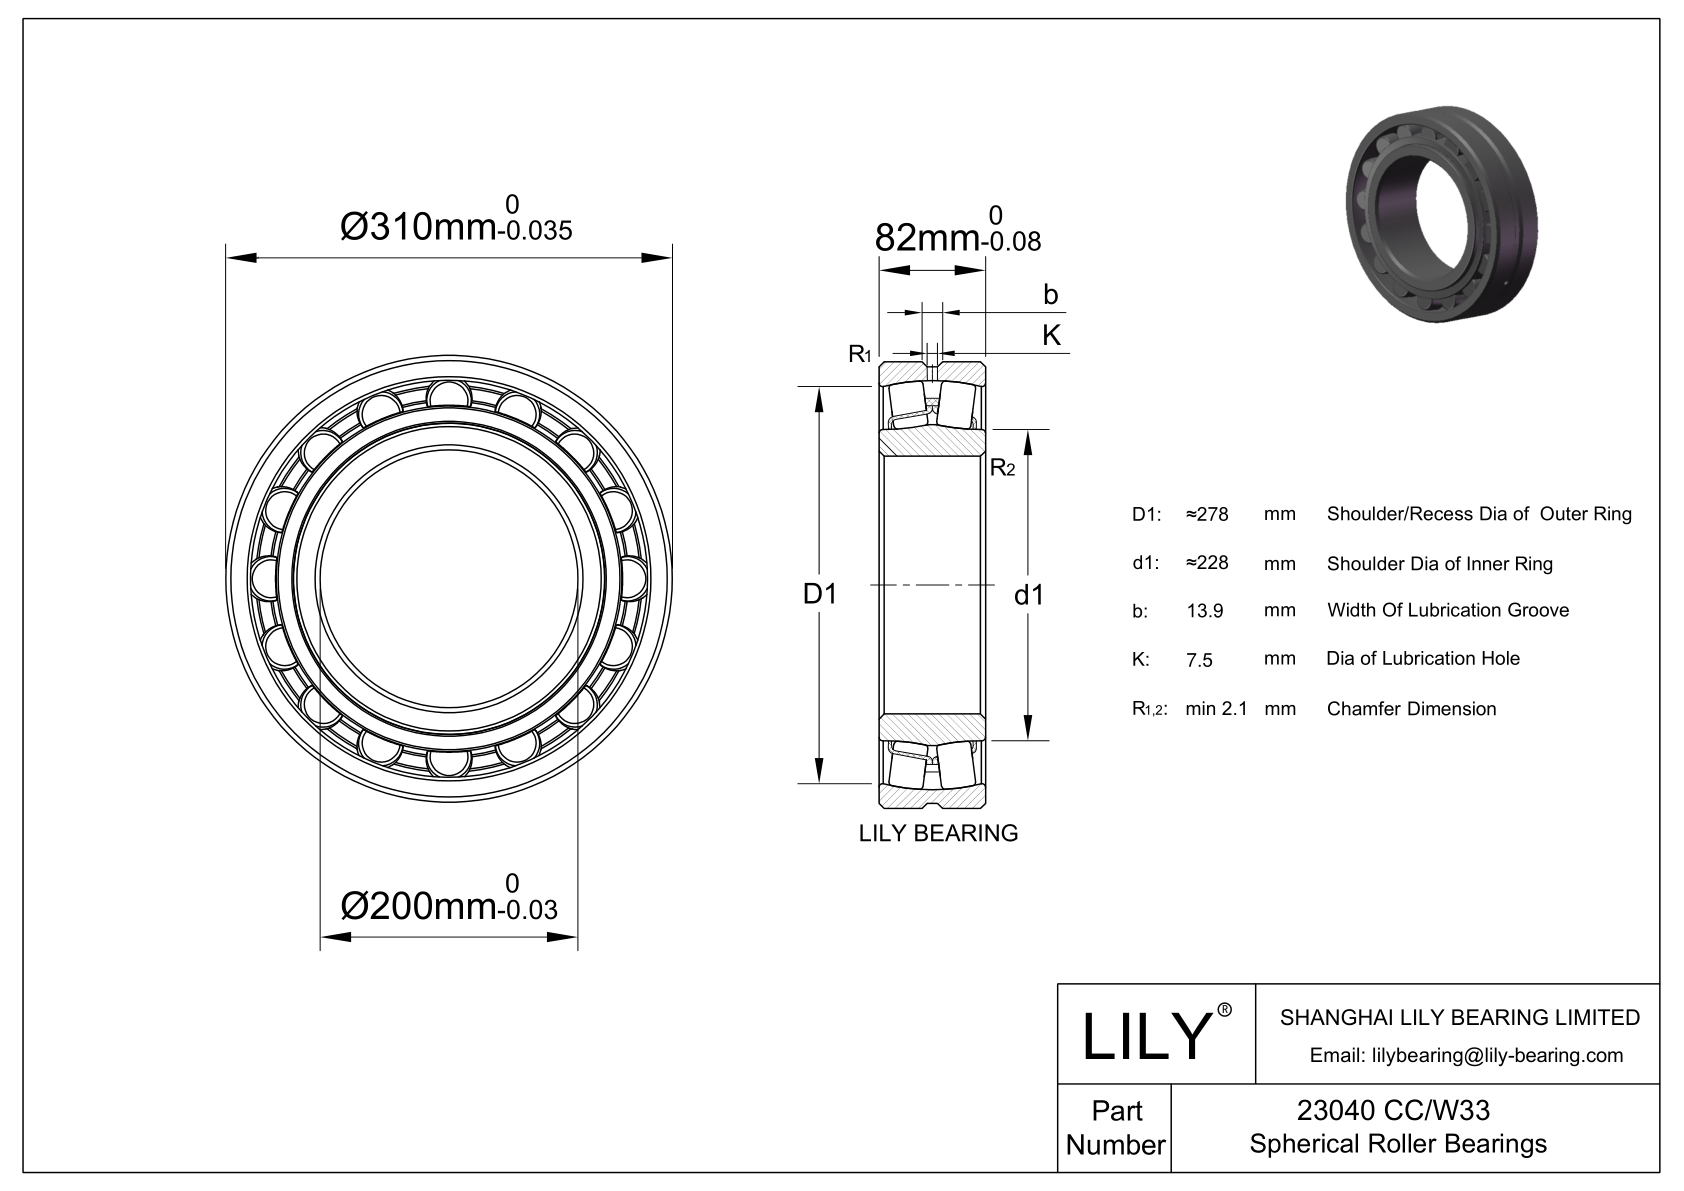 23040 CC/W33 Double Row Spherical Roller Bearing cad drawing